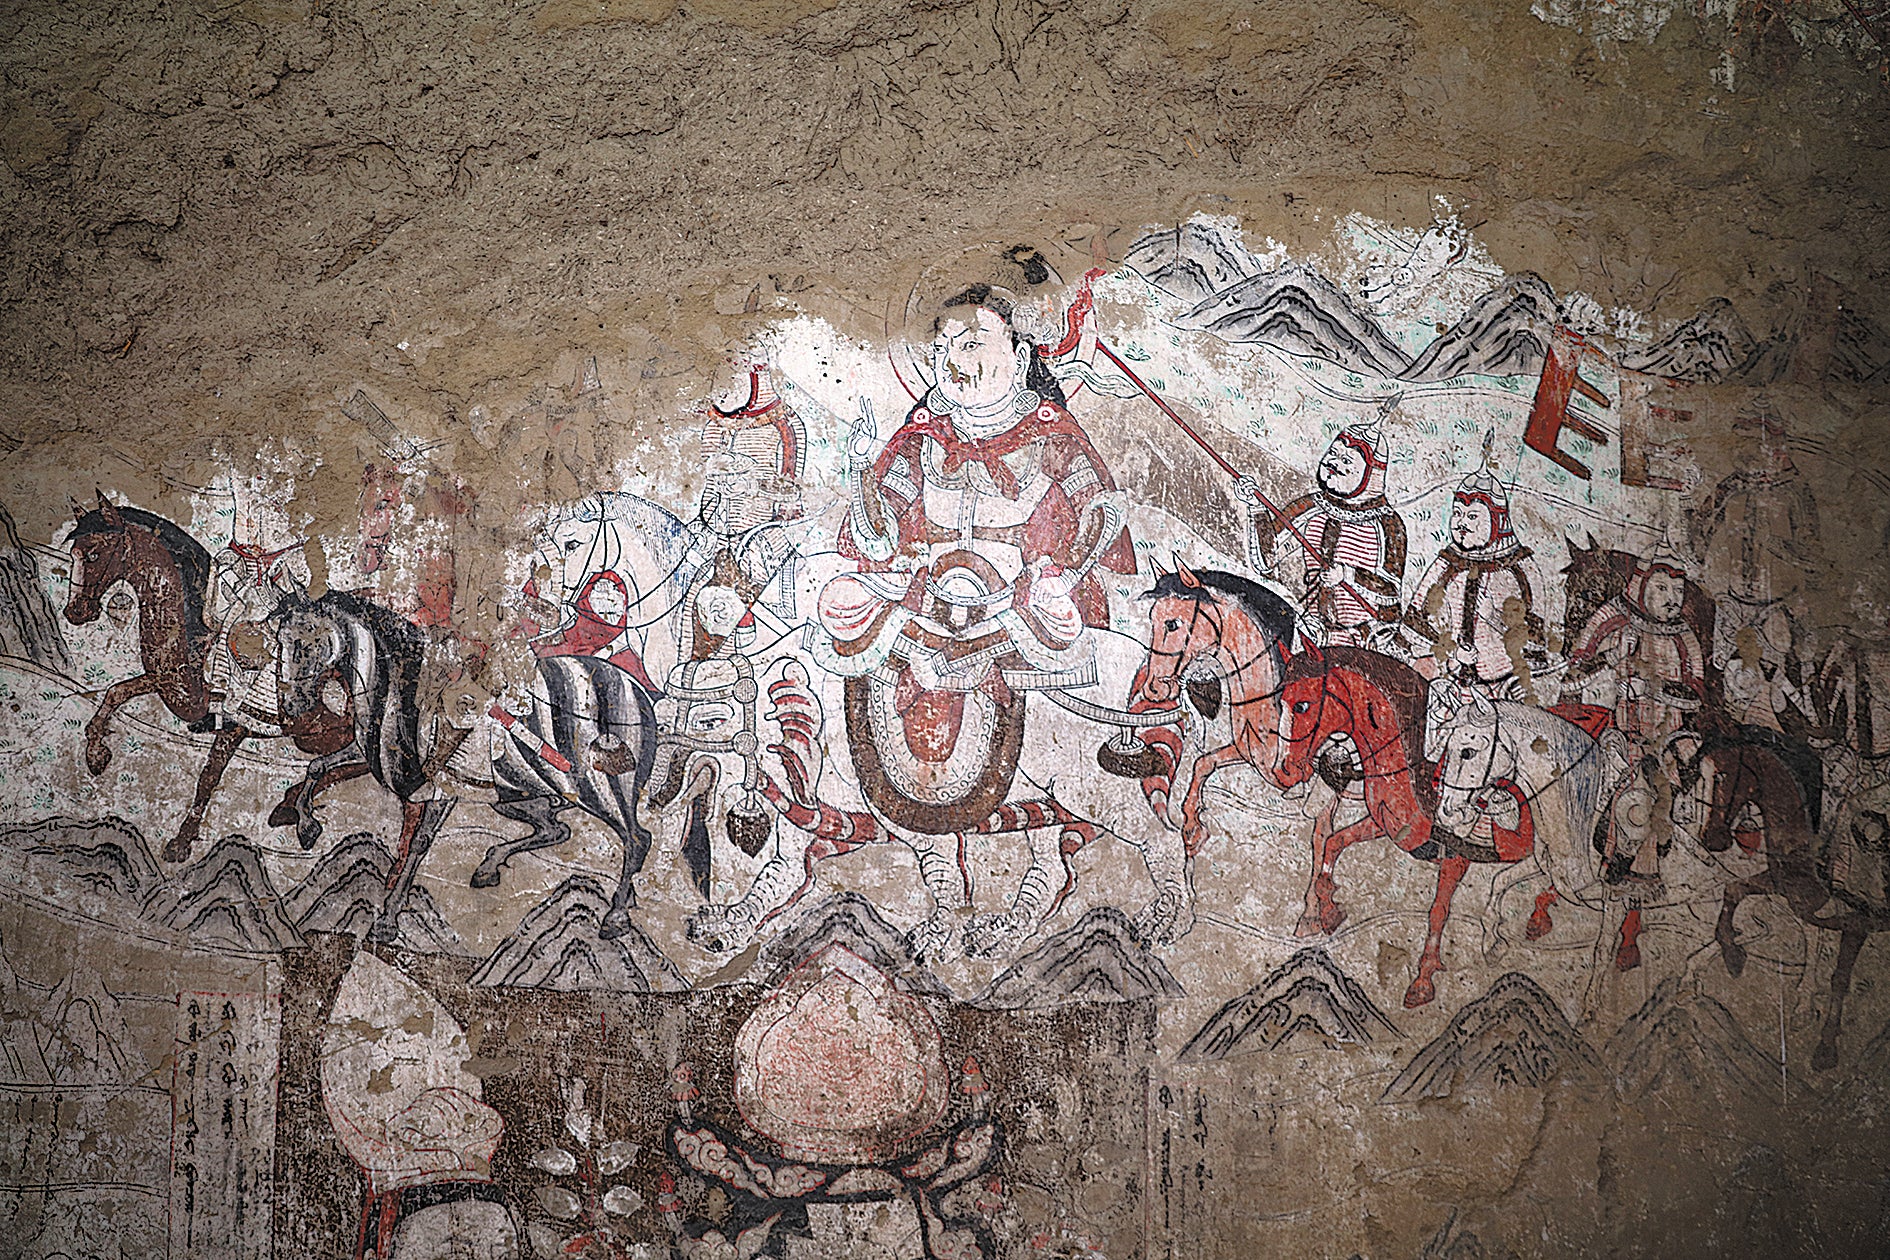 Part of a mural among the Beiting city ruins